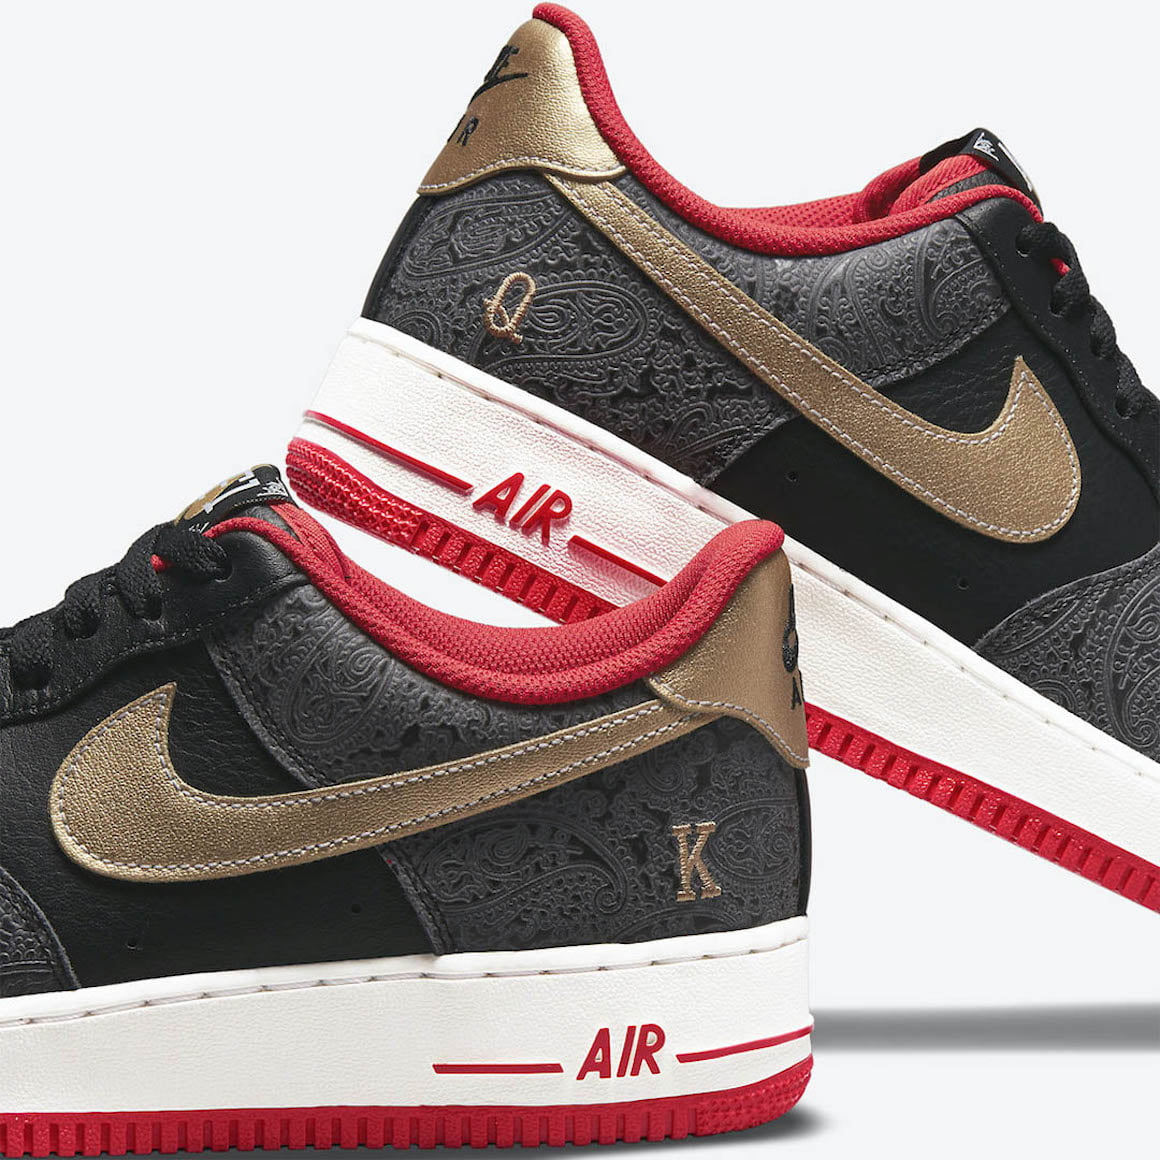 Serena Williams Shares Custom Nike AF1s Inspired by Her Iconic Looks